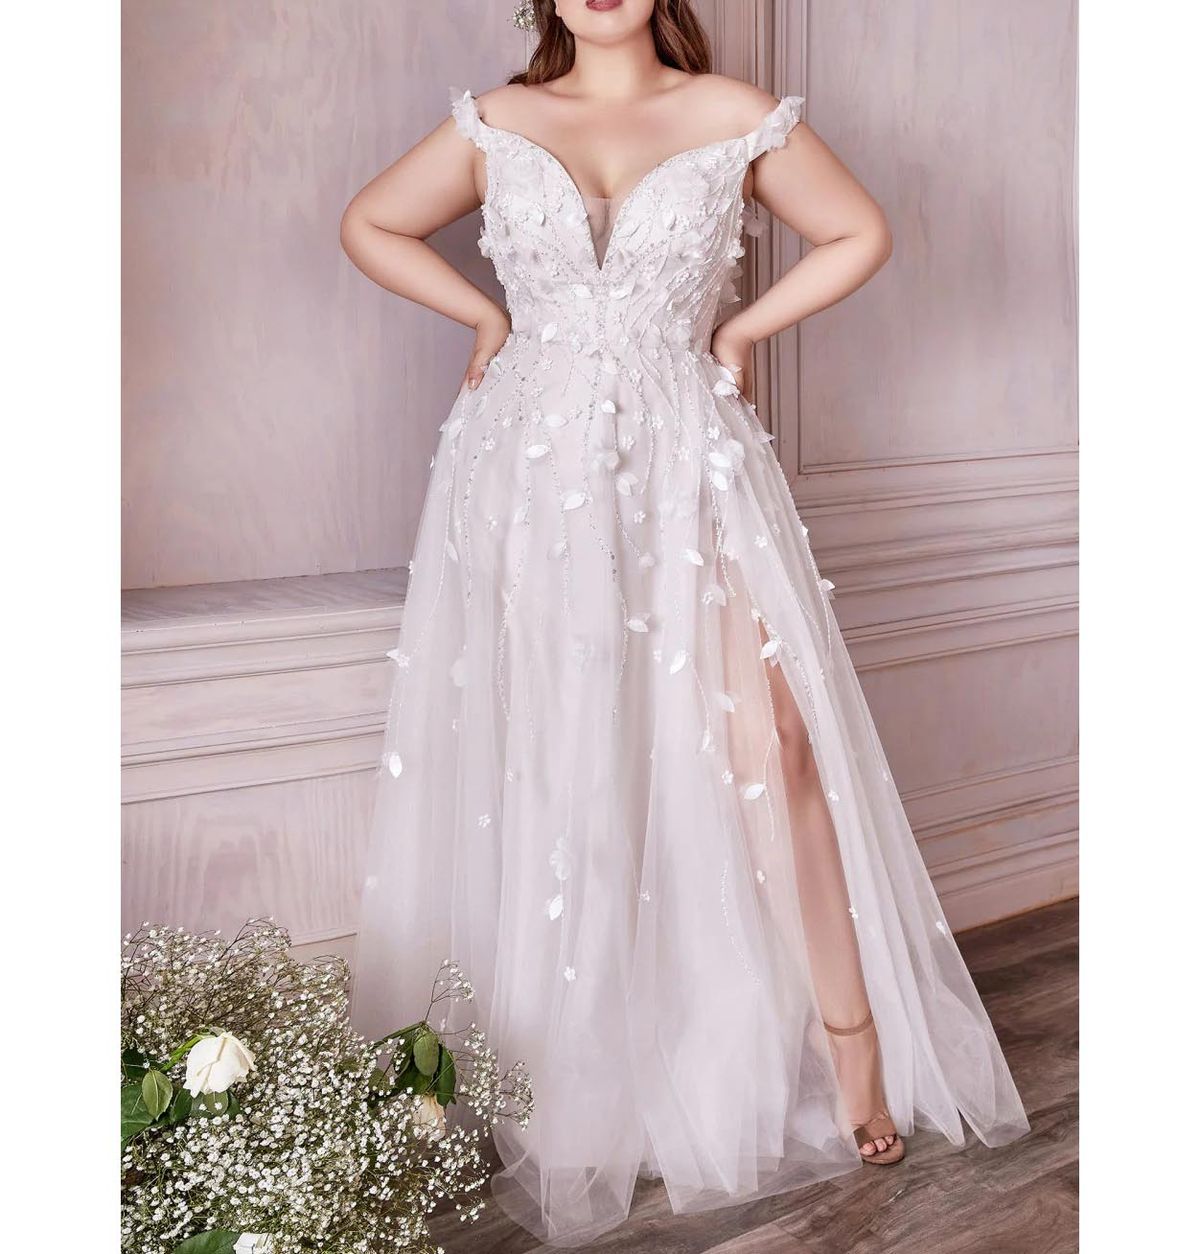 Style Off white Sweetheart Neckline Floral Sequined A-line Ball Gown Wedding Dress Andrea and Leo Plus Size 20 Wedding Off The Shoulder Floral White Ball Gown on Queenly